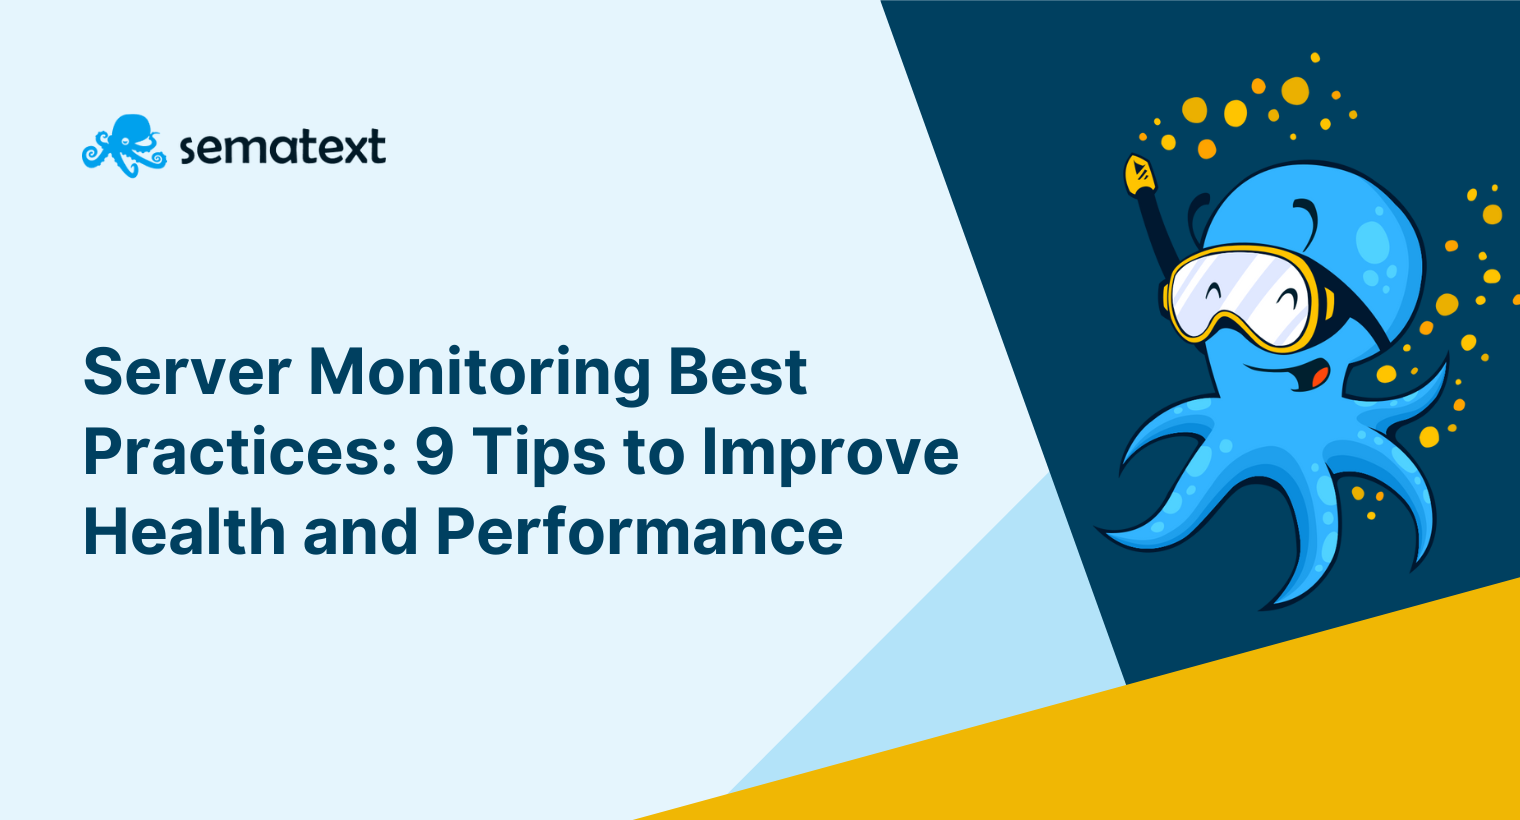 Server Monitoring Best Practices: 9 Tips to Improve Health and Performance